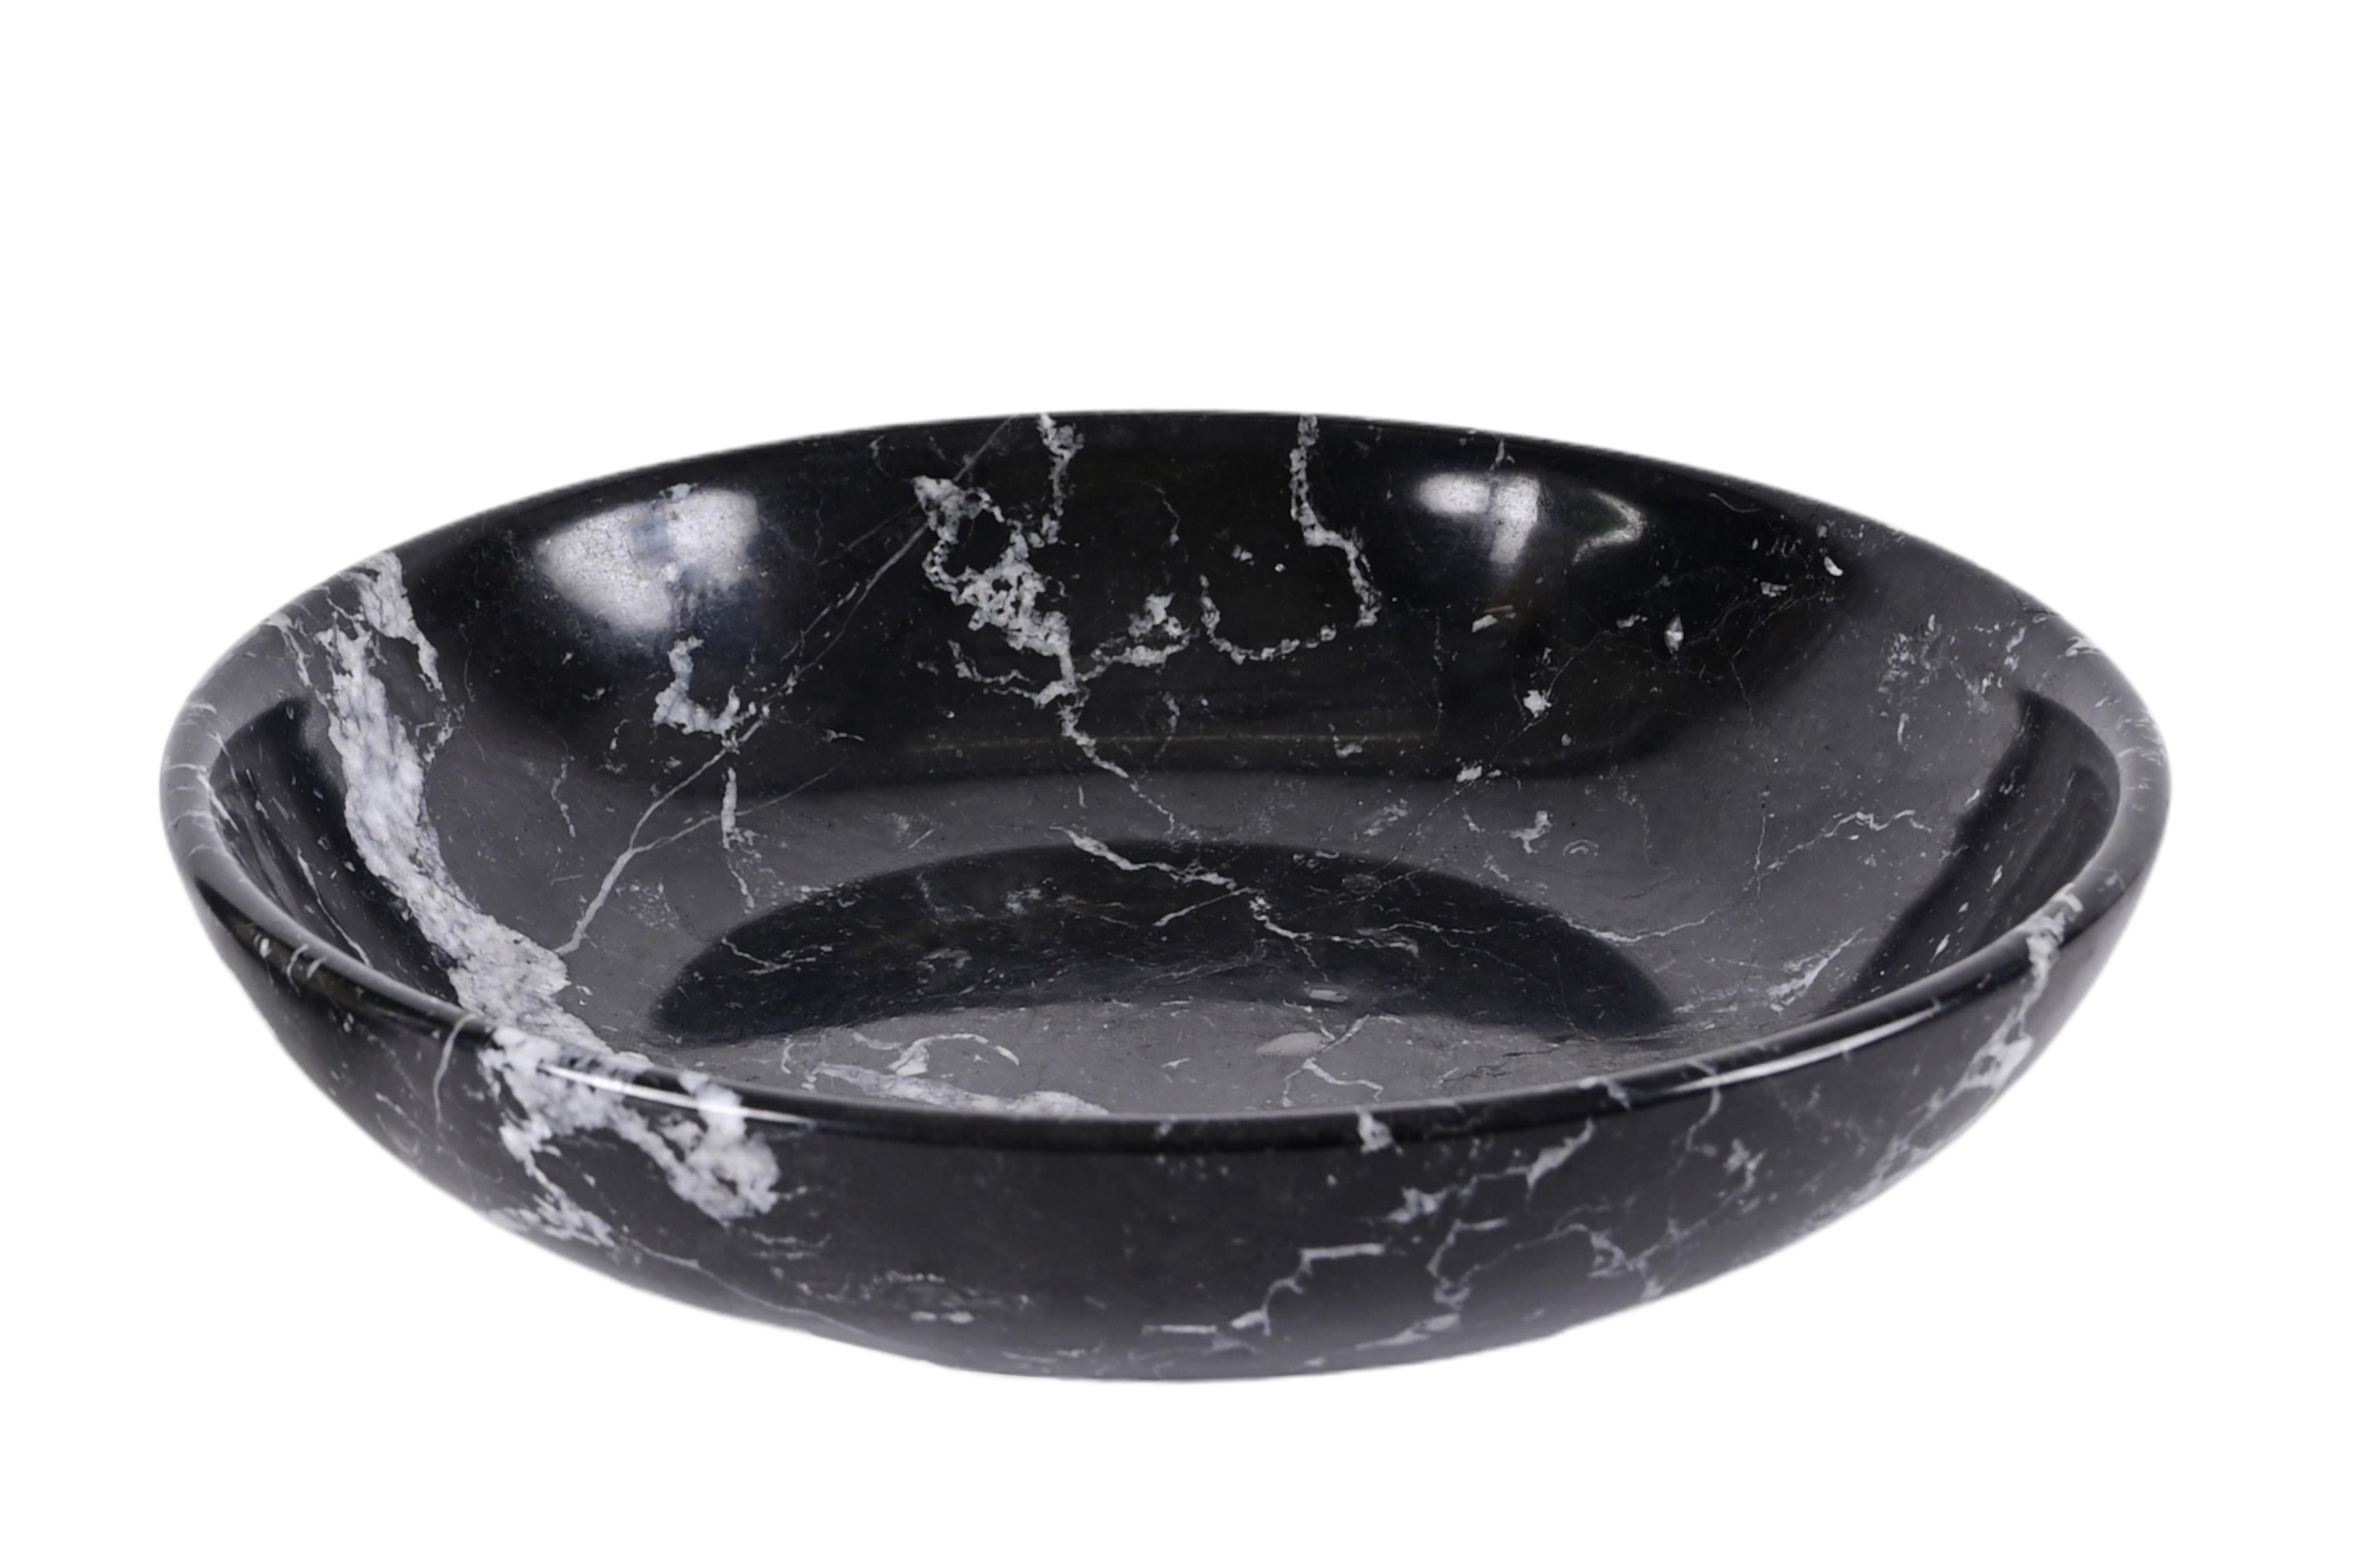 Midcentury Black Marble with White Grains Round Italian Decorative Bowl, 1950s For Sale 3